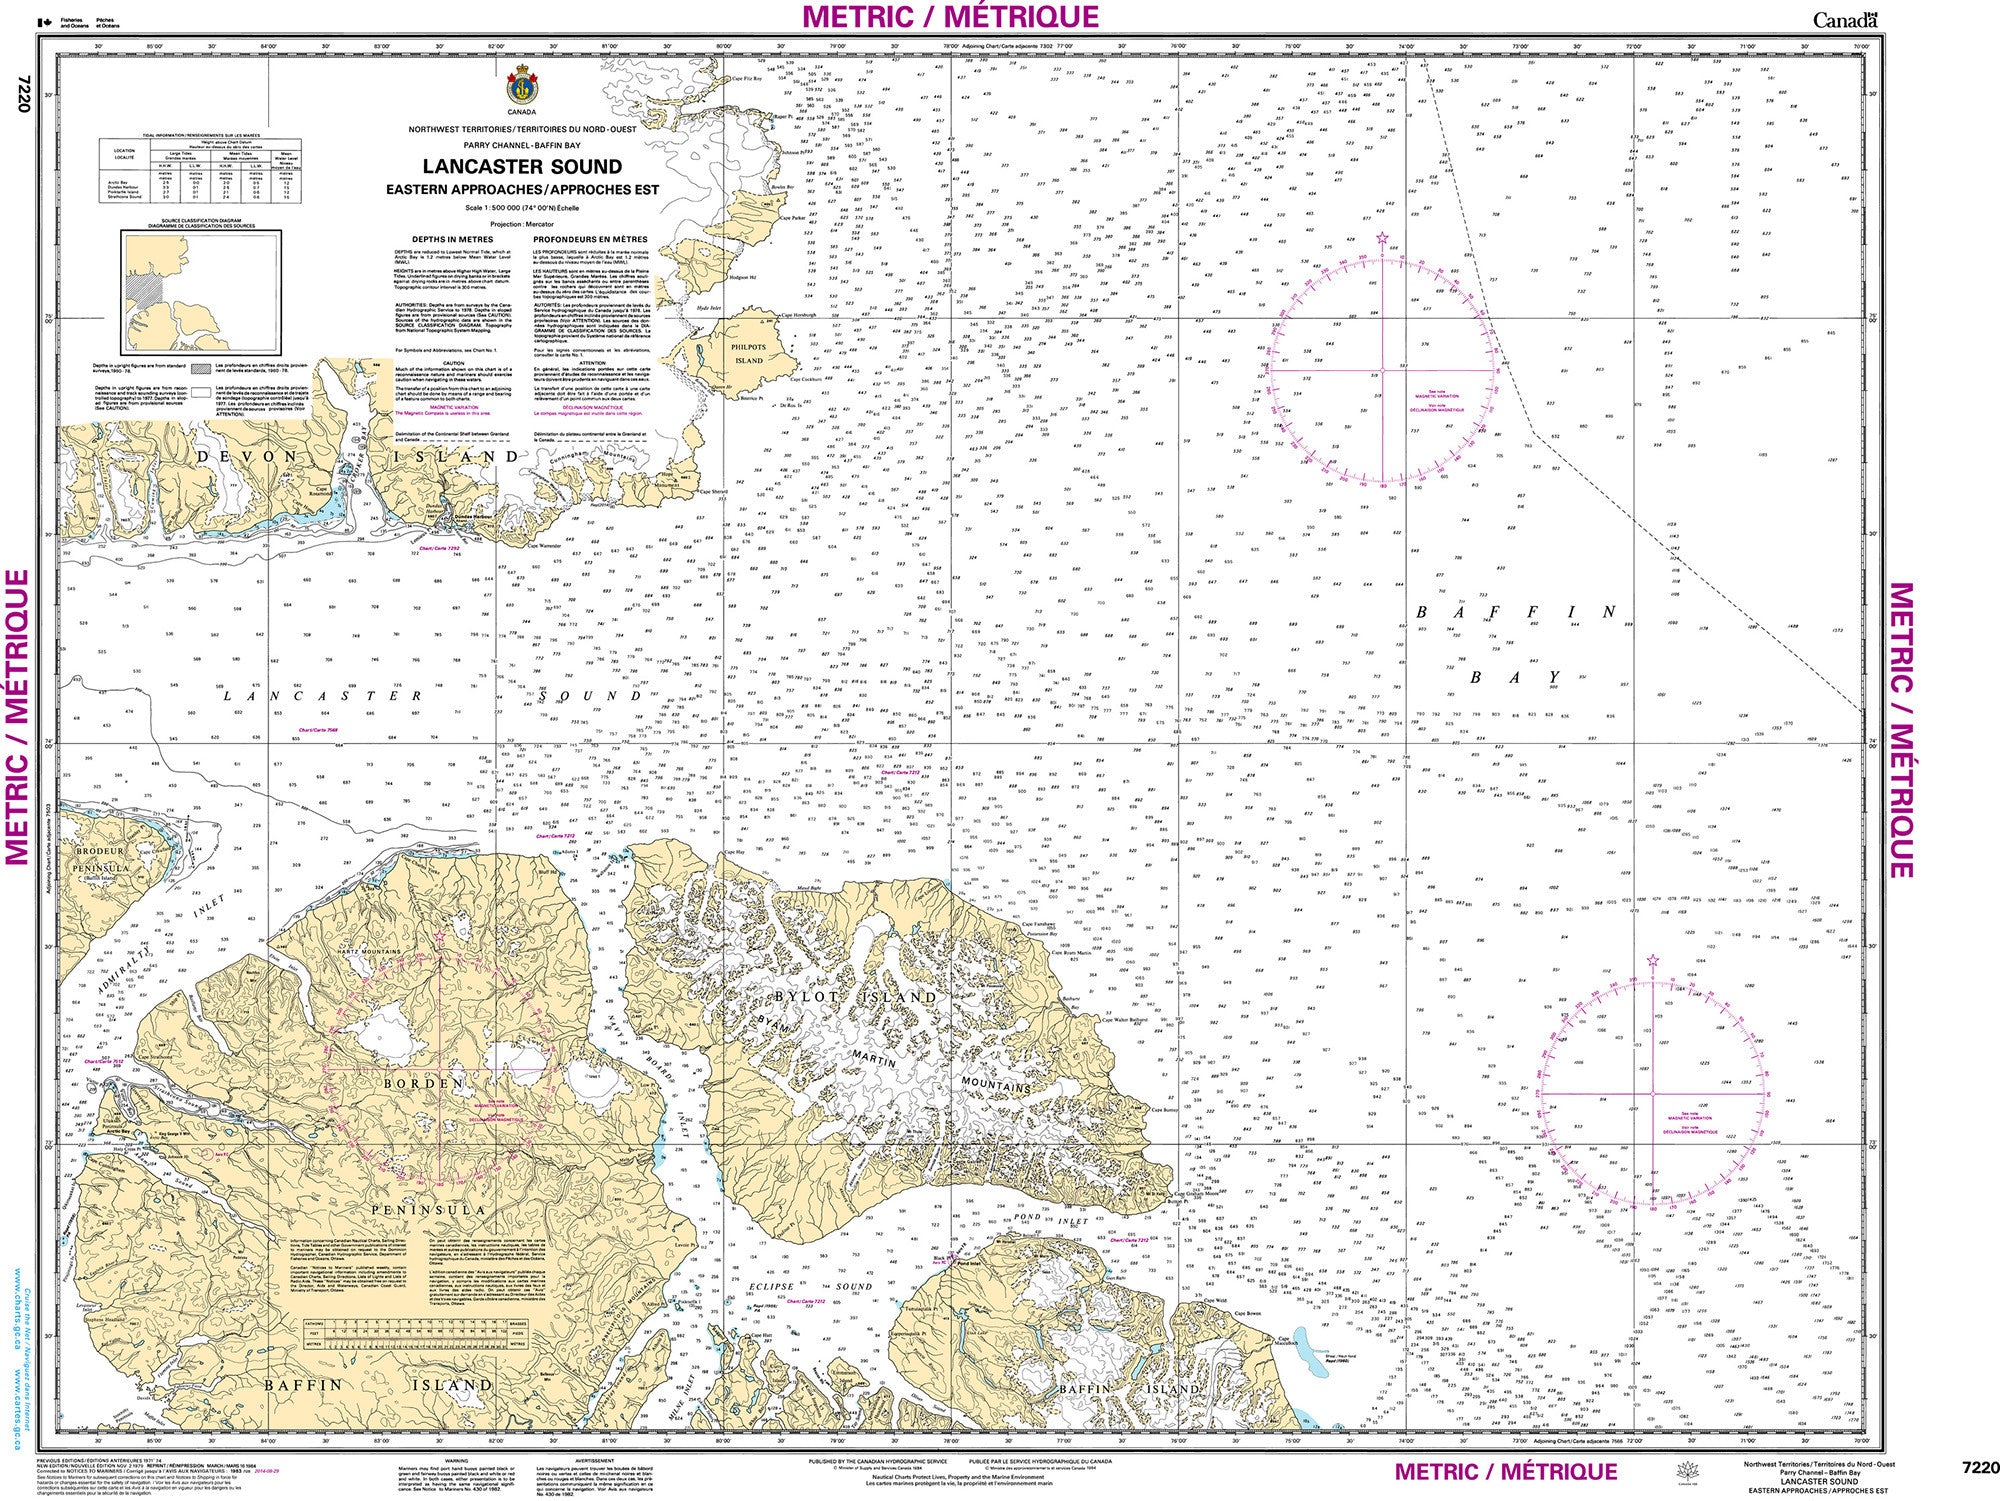 Canadian Hydrographic Service Nautical Chart CHS7220: Lancaster Sound, Eastern Approaches/Approches Est